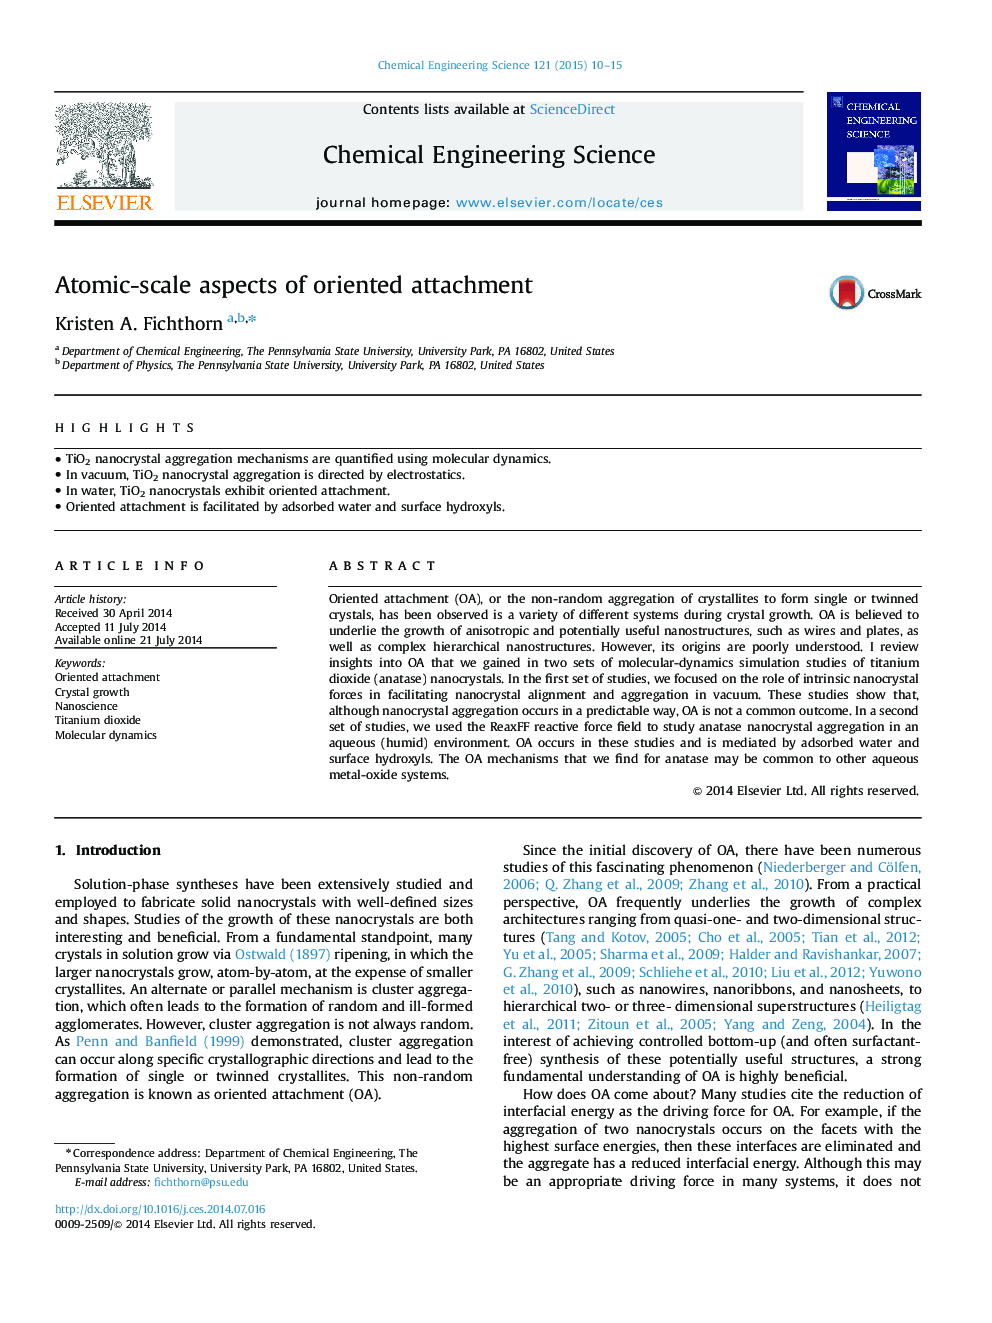 Atomic-scale aspects of oriented attachment